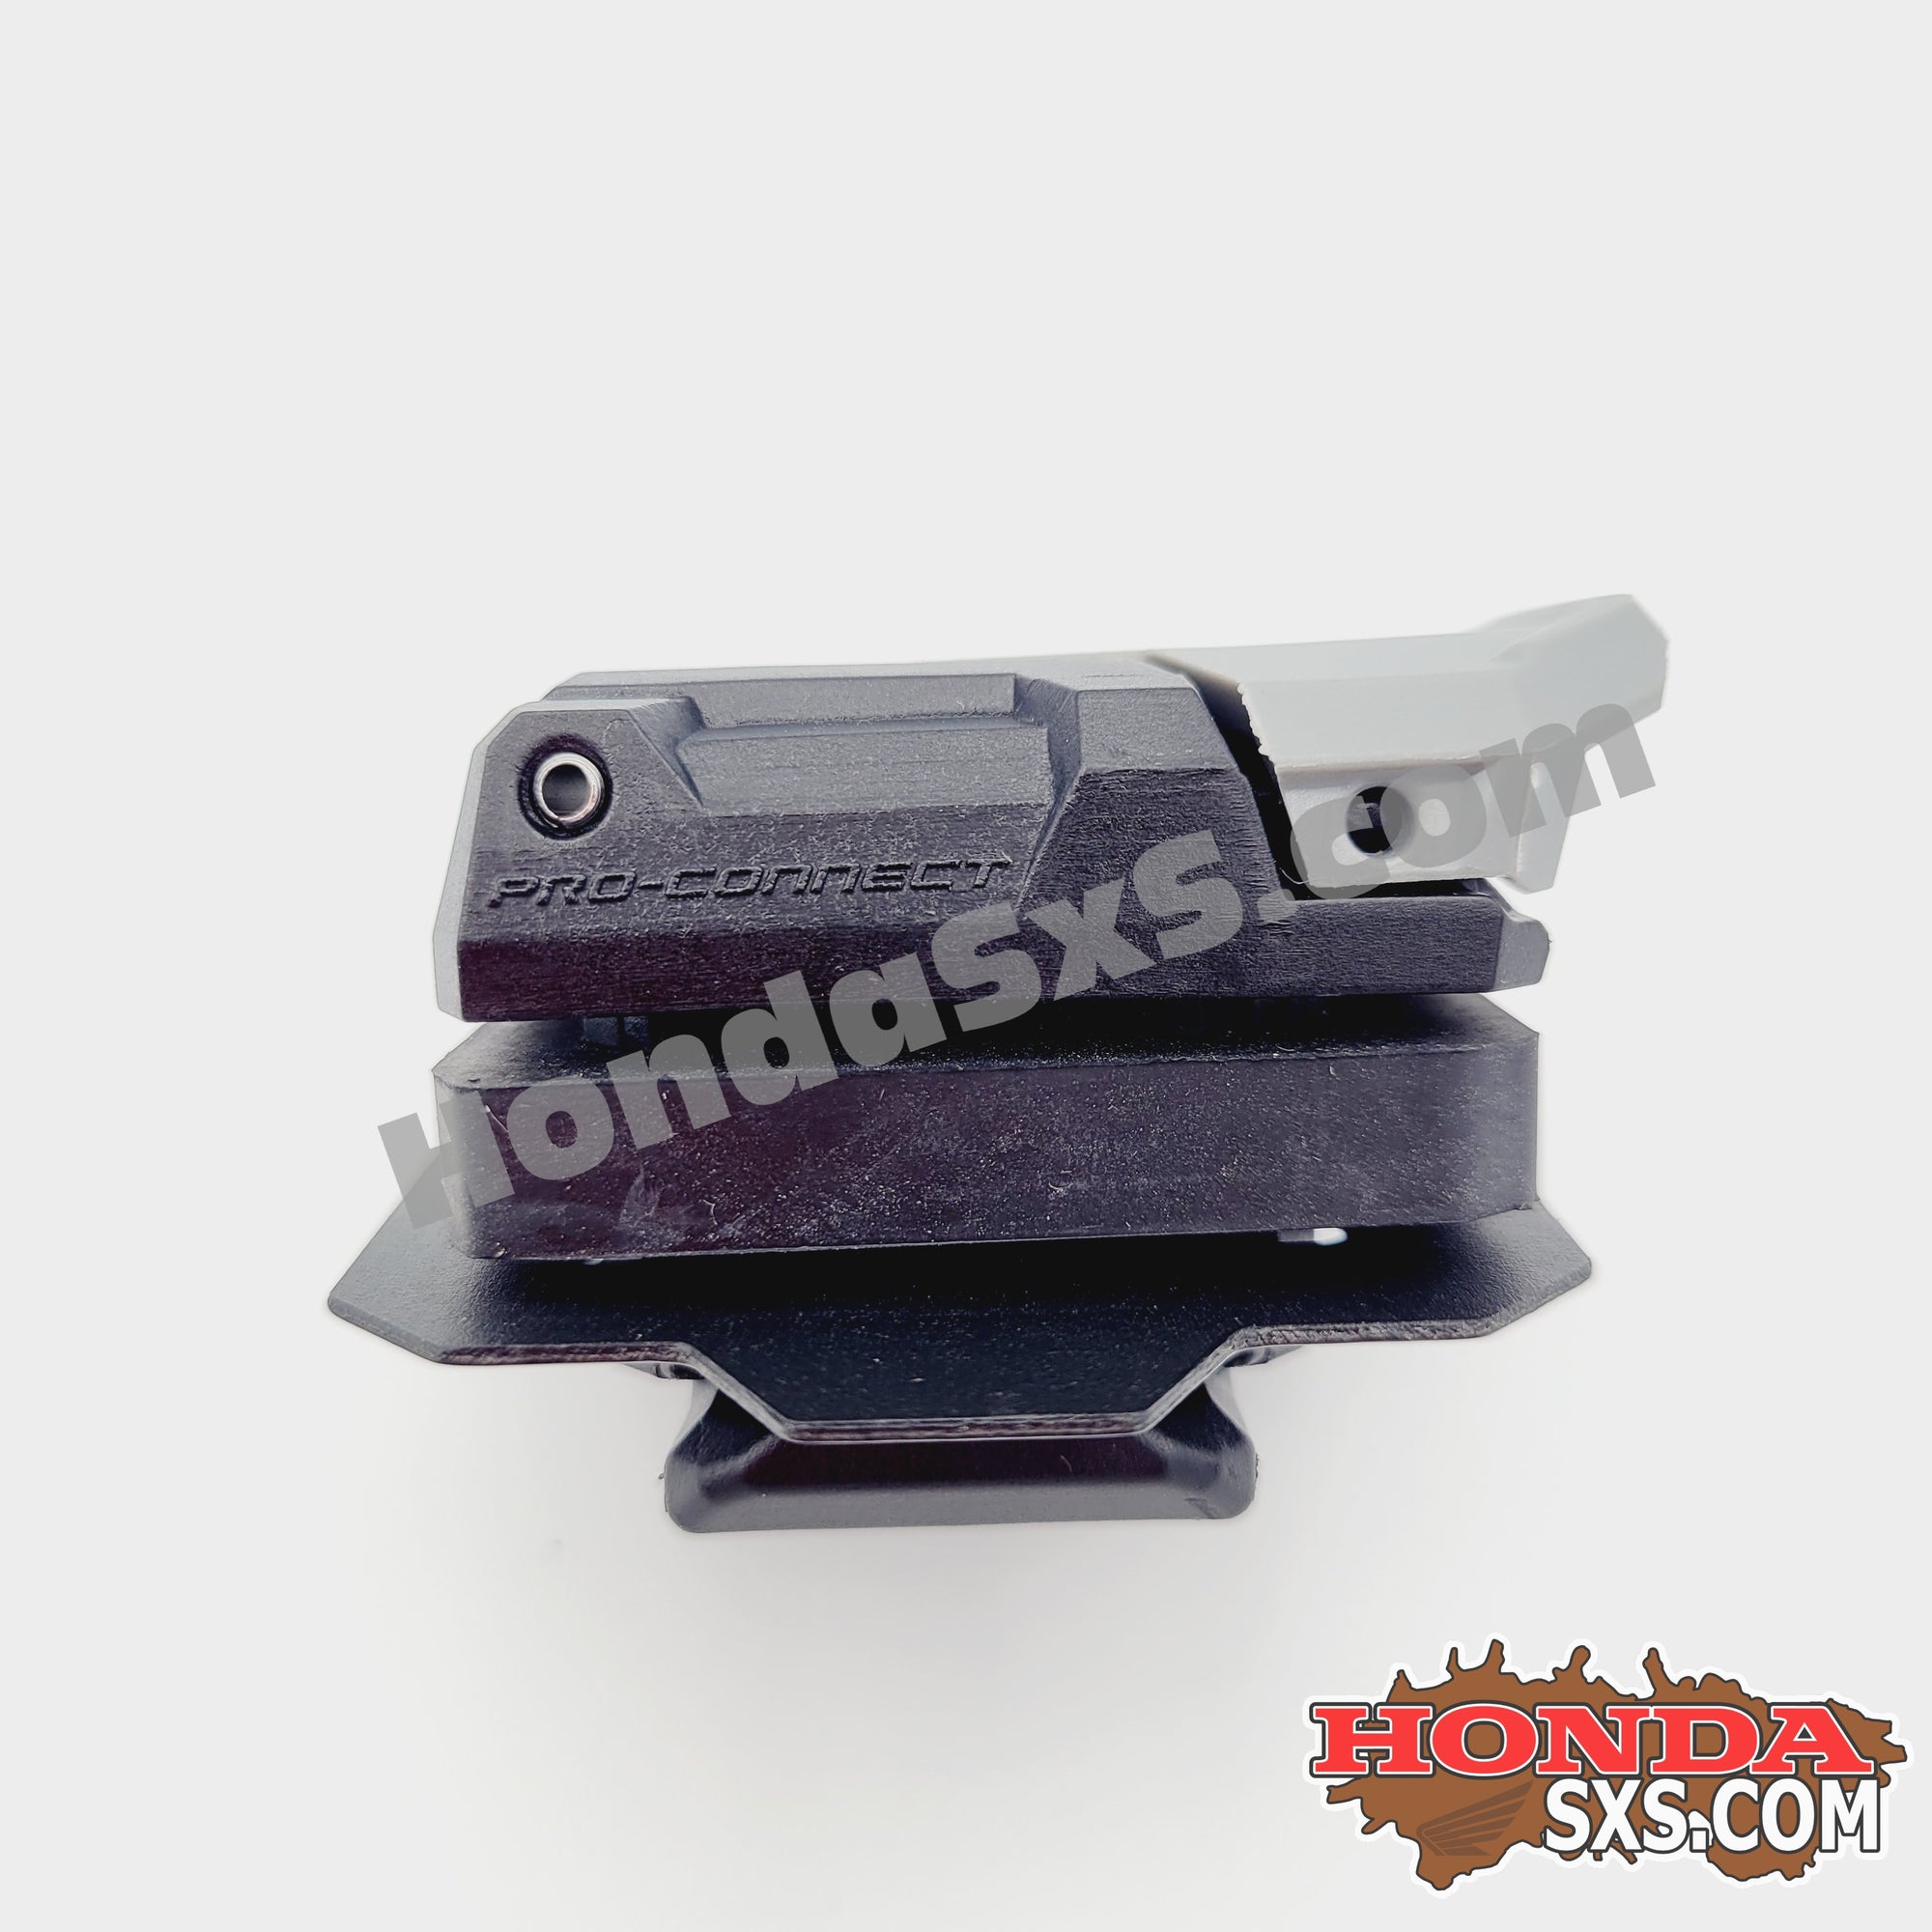 Honda Pro-Connect Latch, Replacement Clamp, Mount. - The Honda SxS Club!